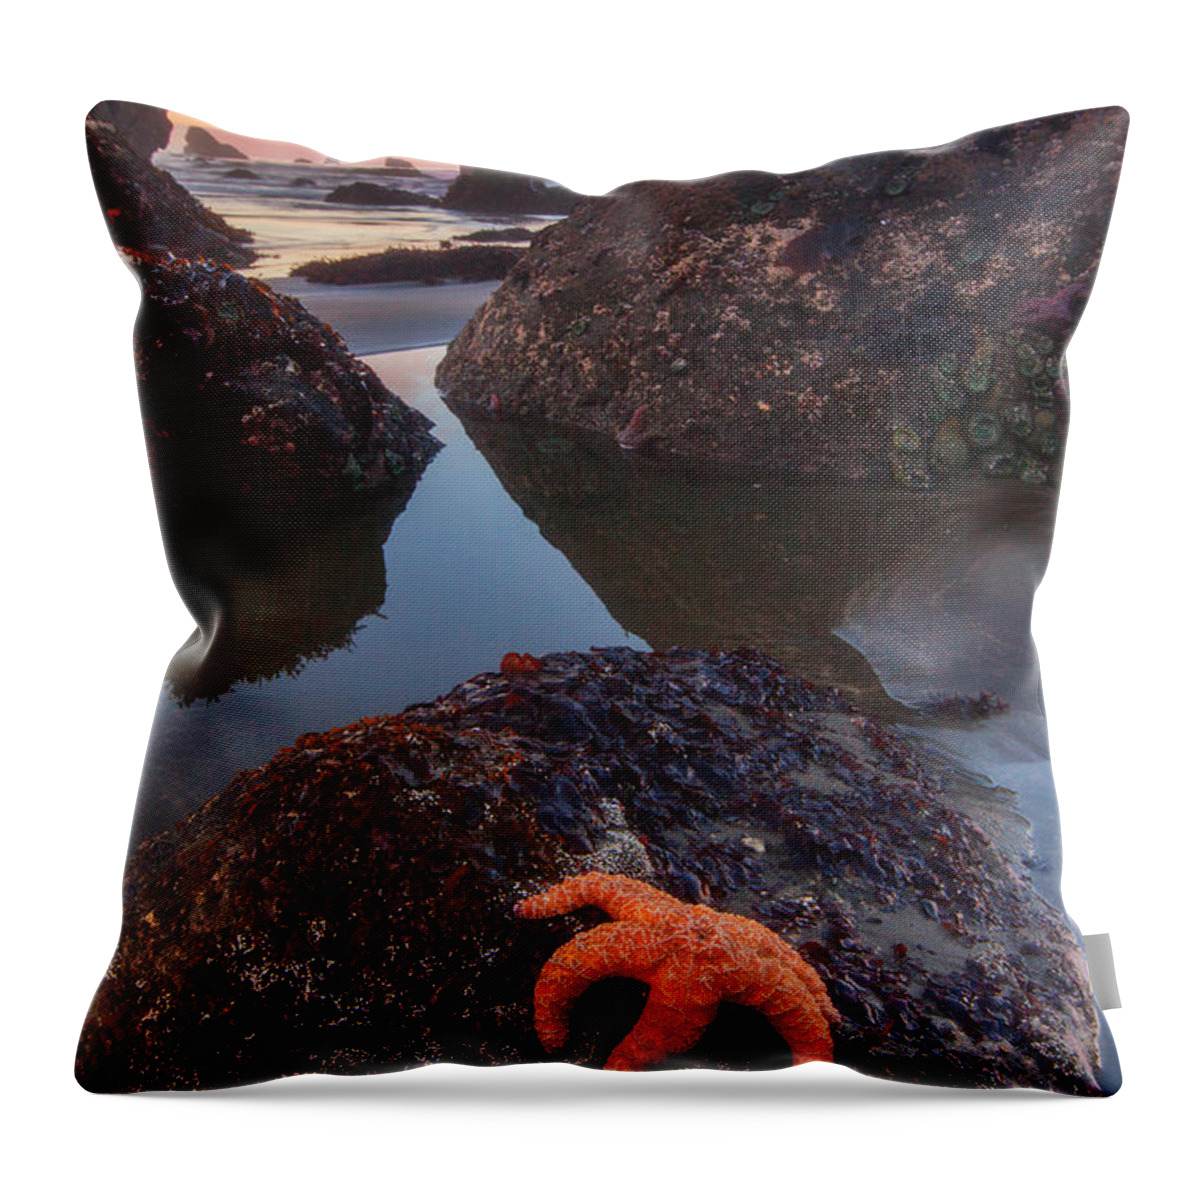 Southern Oregon Coast Throw Pillow featuring the photograph Battle Rock Sunrise by Darren White